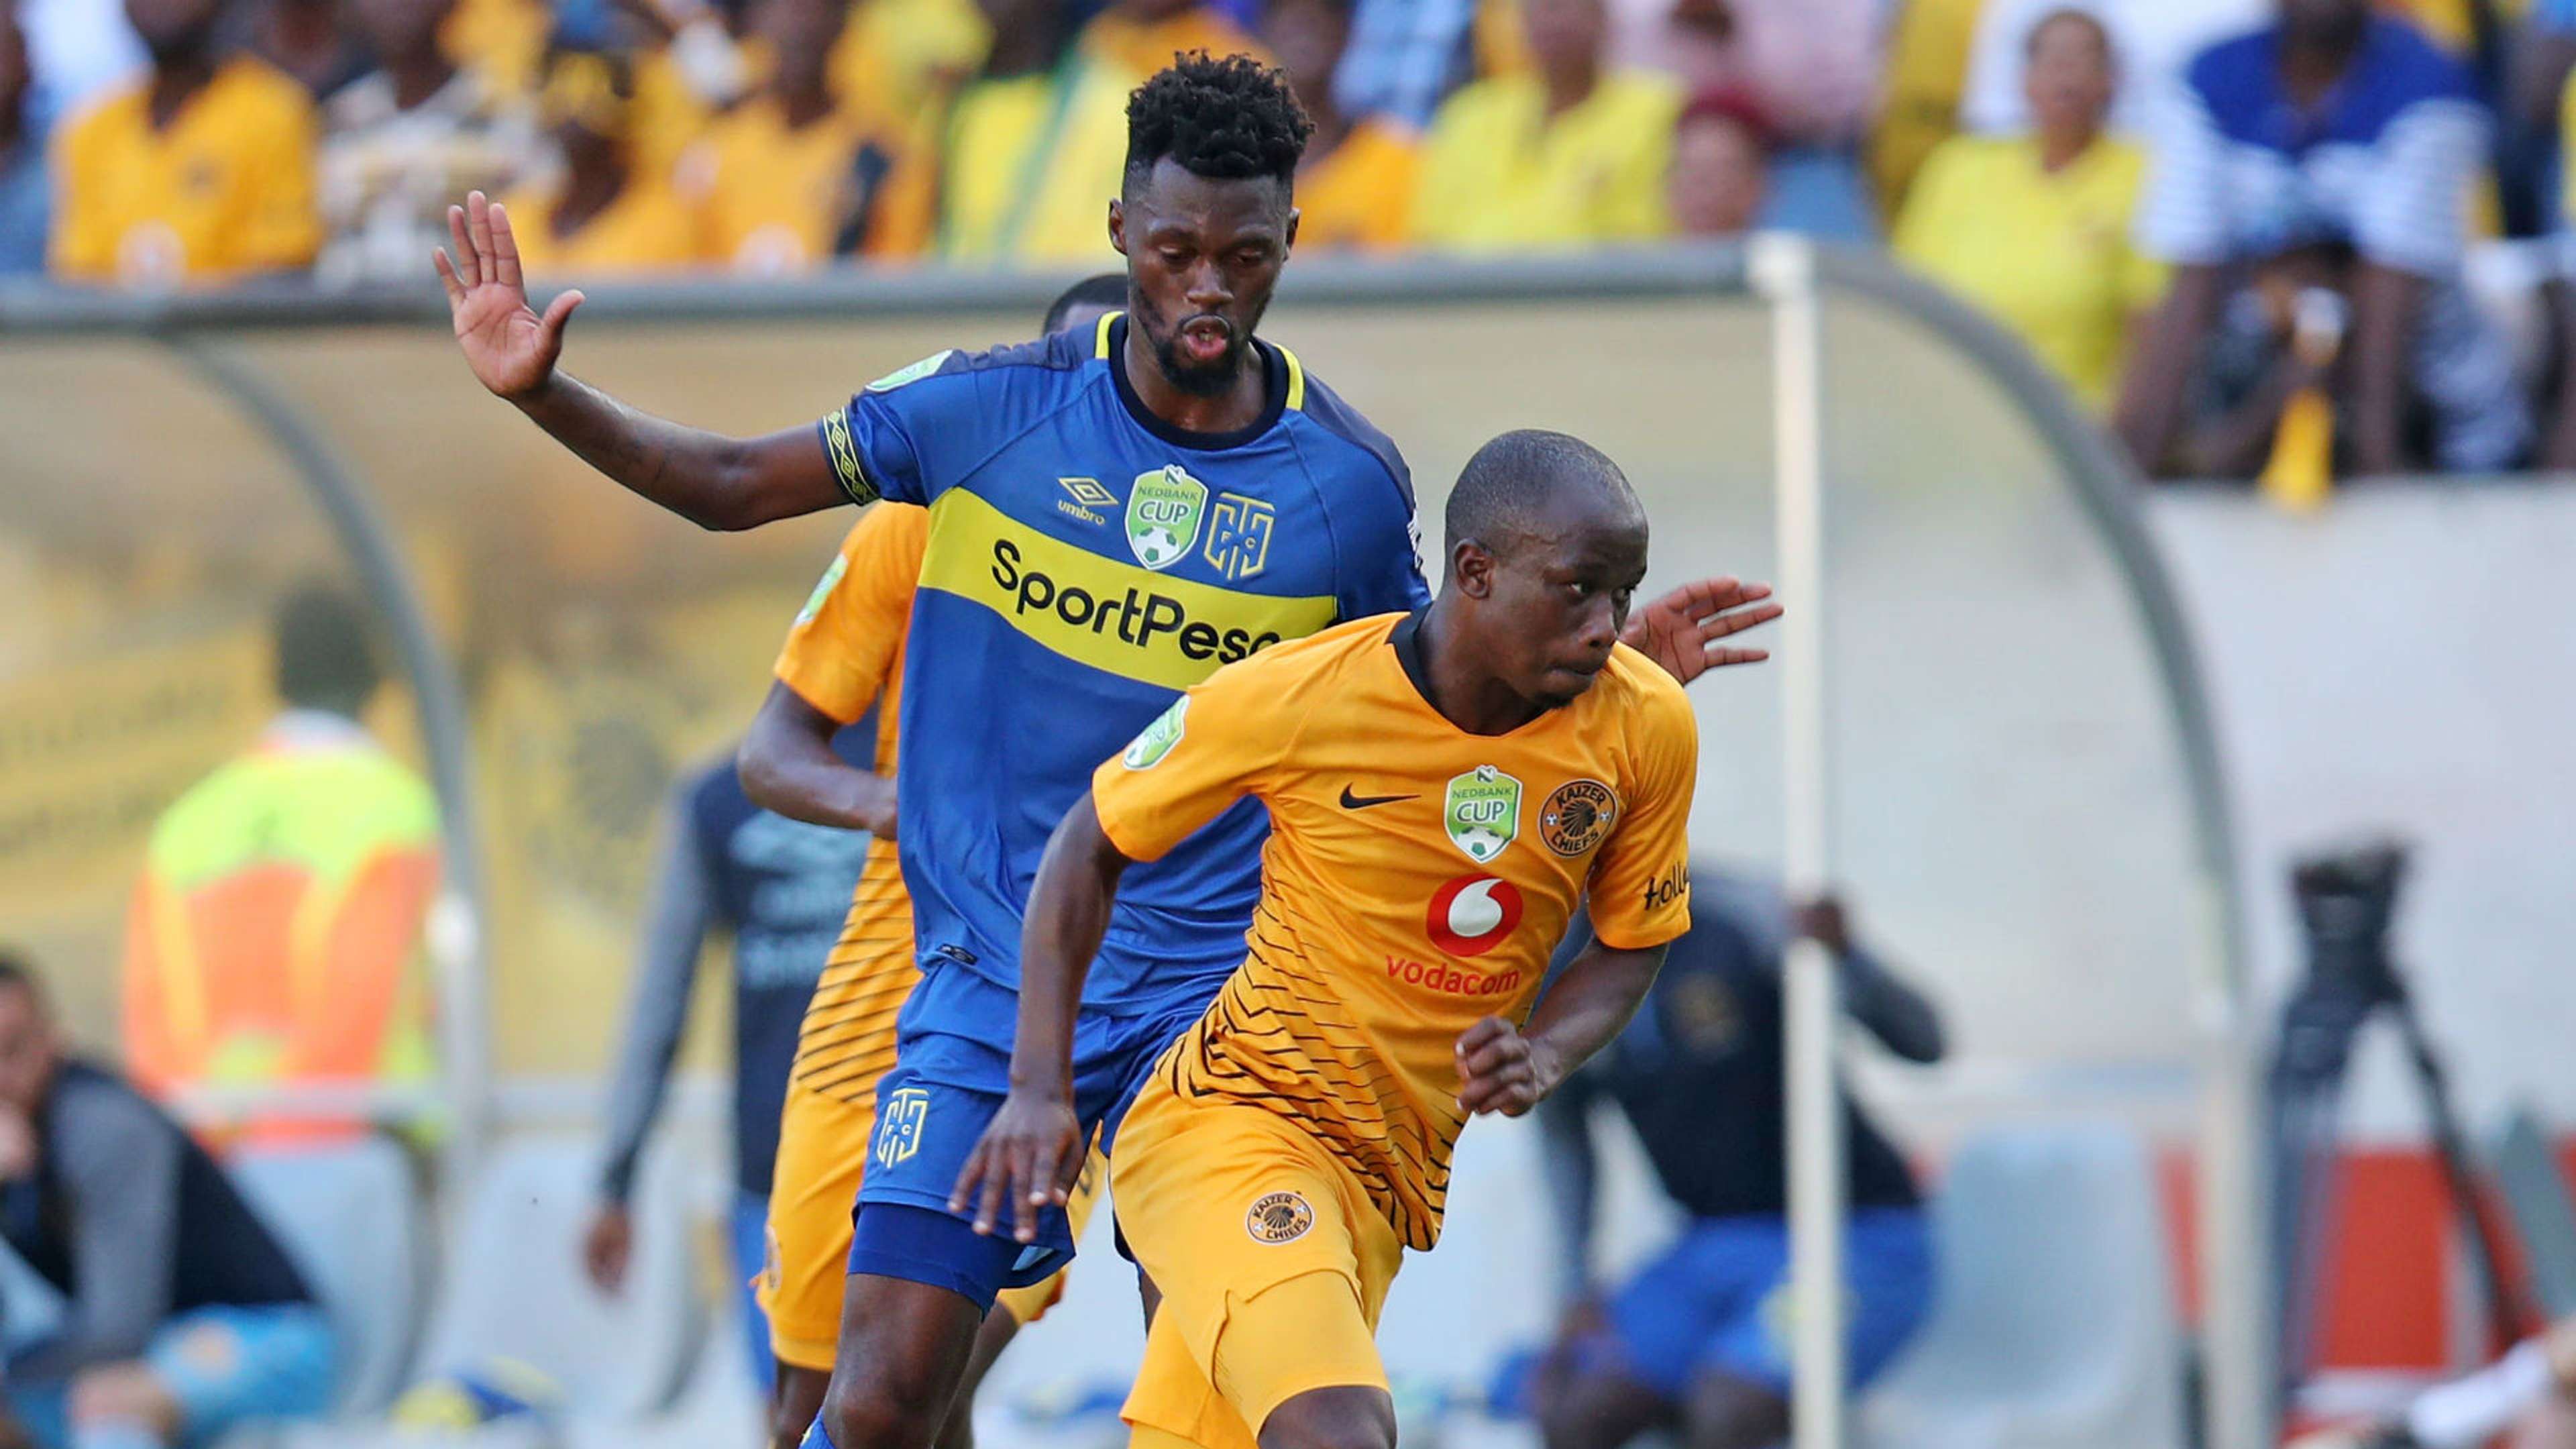 Siphosakhe Ntiya Ntiya of Kaizer Chiefs challenged by Thato Mokeke of Cape Town City, March 2019